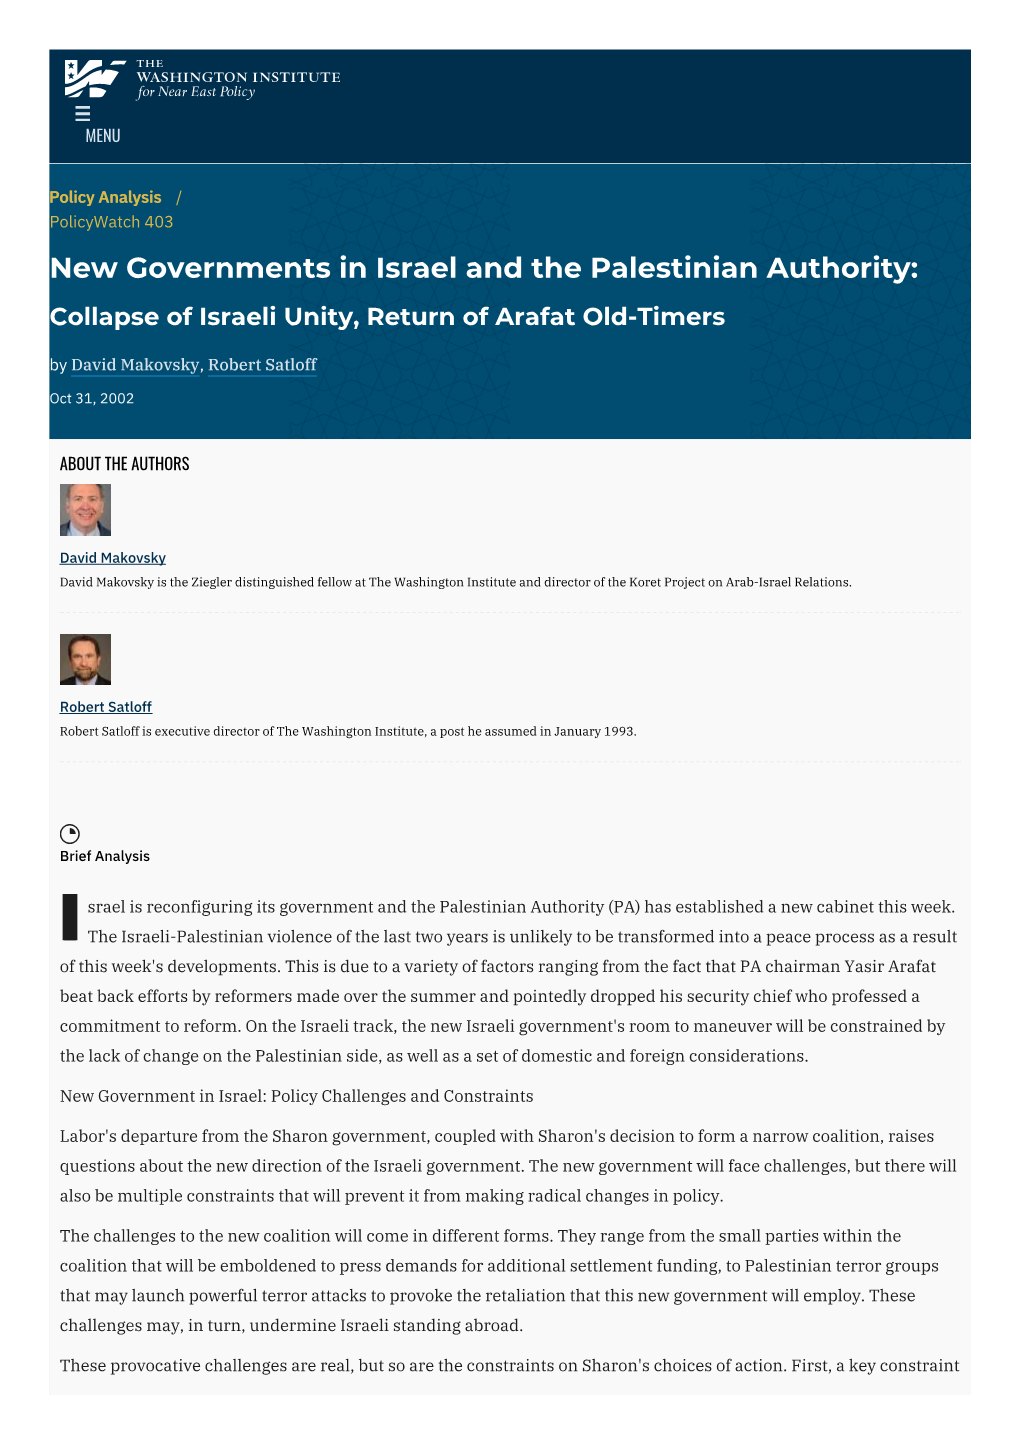 New Governments in Israel and the Palestinian Authority: Collapse of Israeli Unity, Return of Arafat Old-Timers by David Makovsky, Robert Satloff